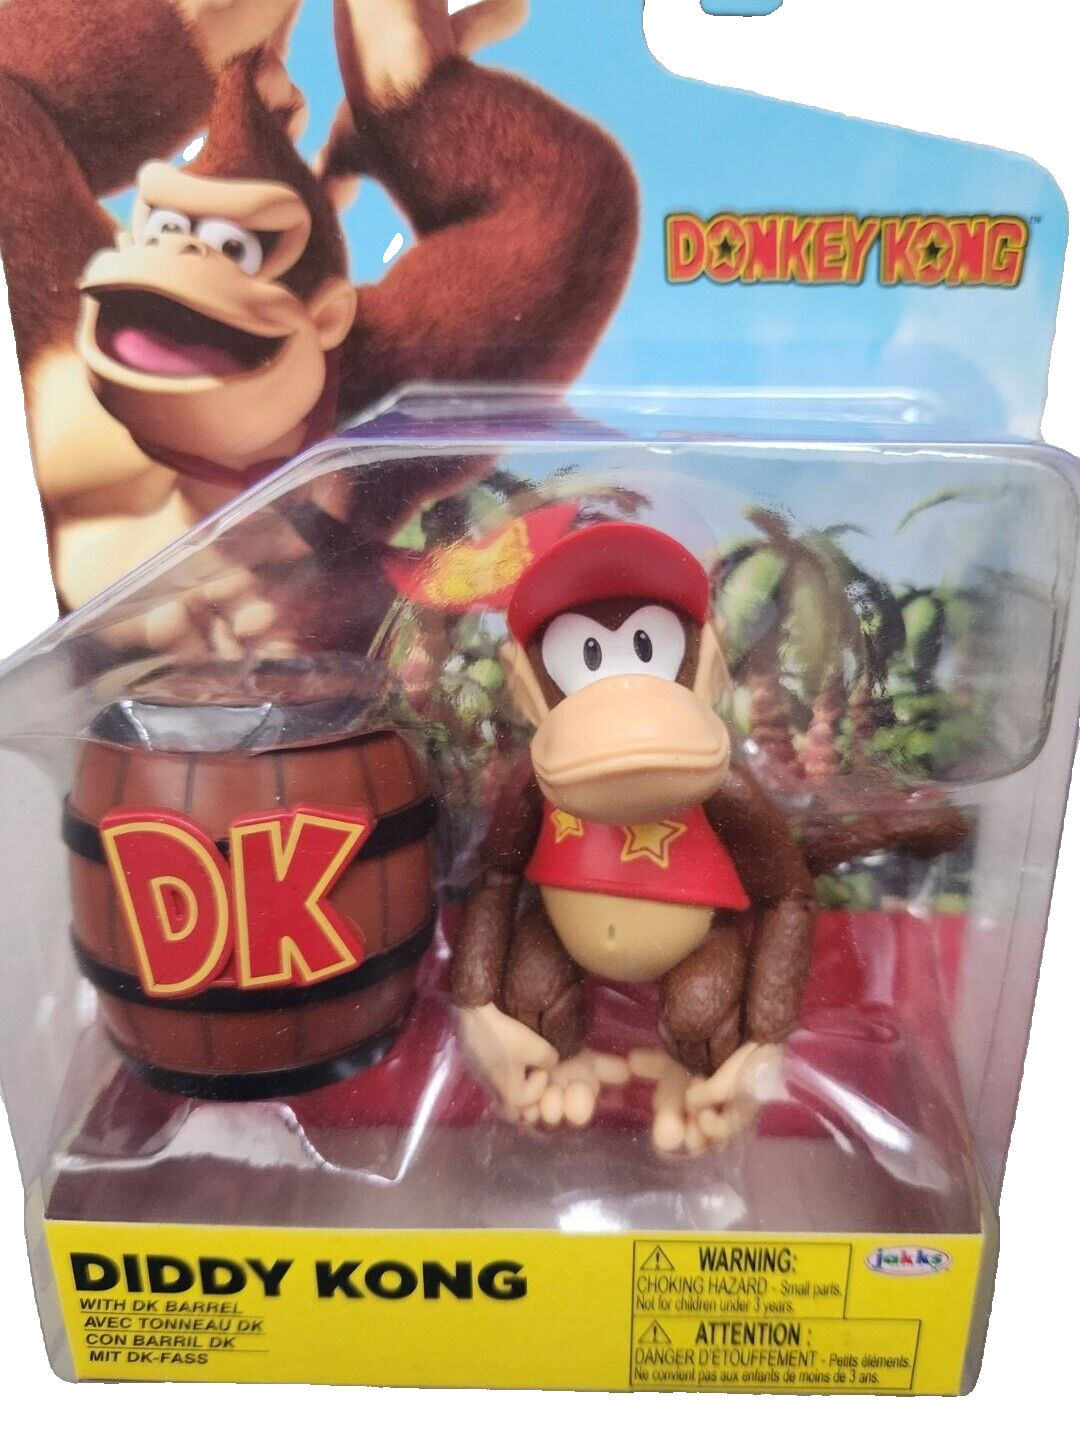 Donkey Kong with Bananas + Diddy Kong  with Barrel 4" Nintendo Jakks Pacific JAKKS Pacific JAKKS Pacific 4 Inch World Of Nintendo Donkey & Diddy Kong - фотография #2